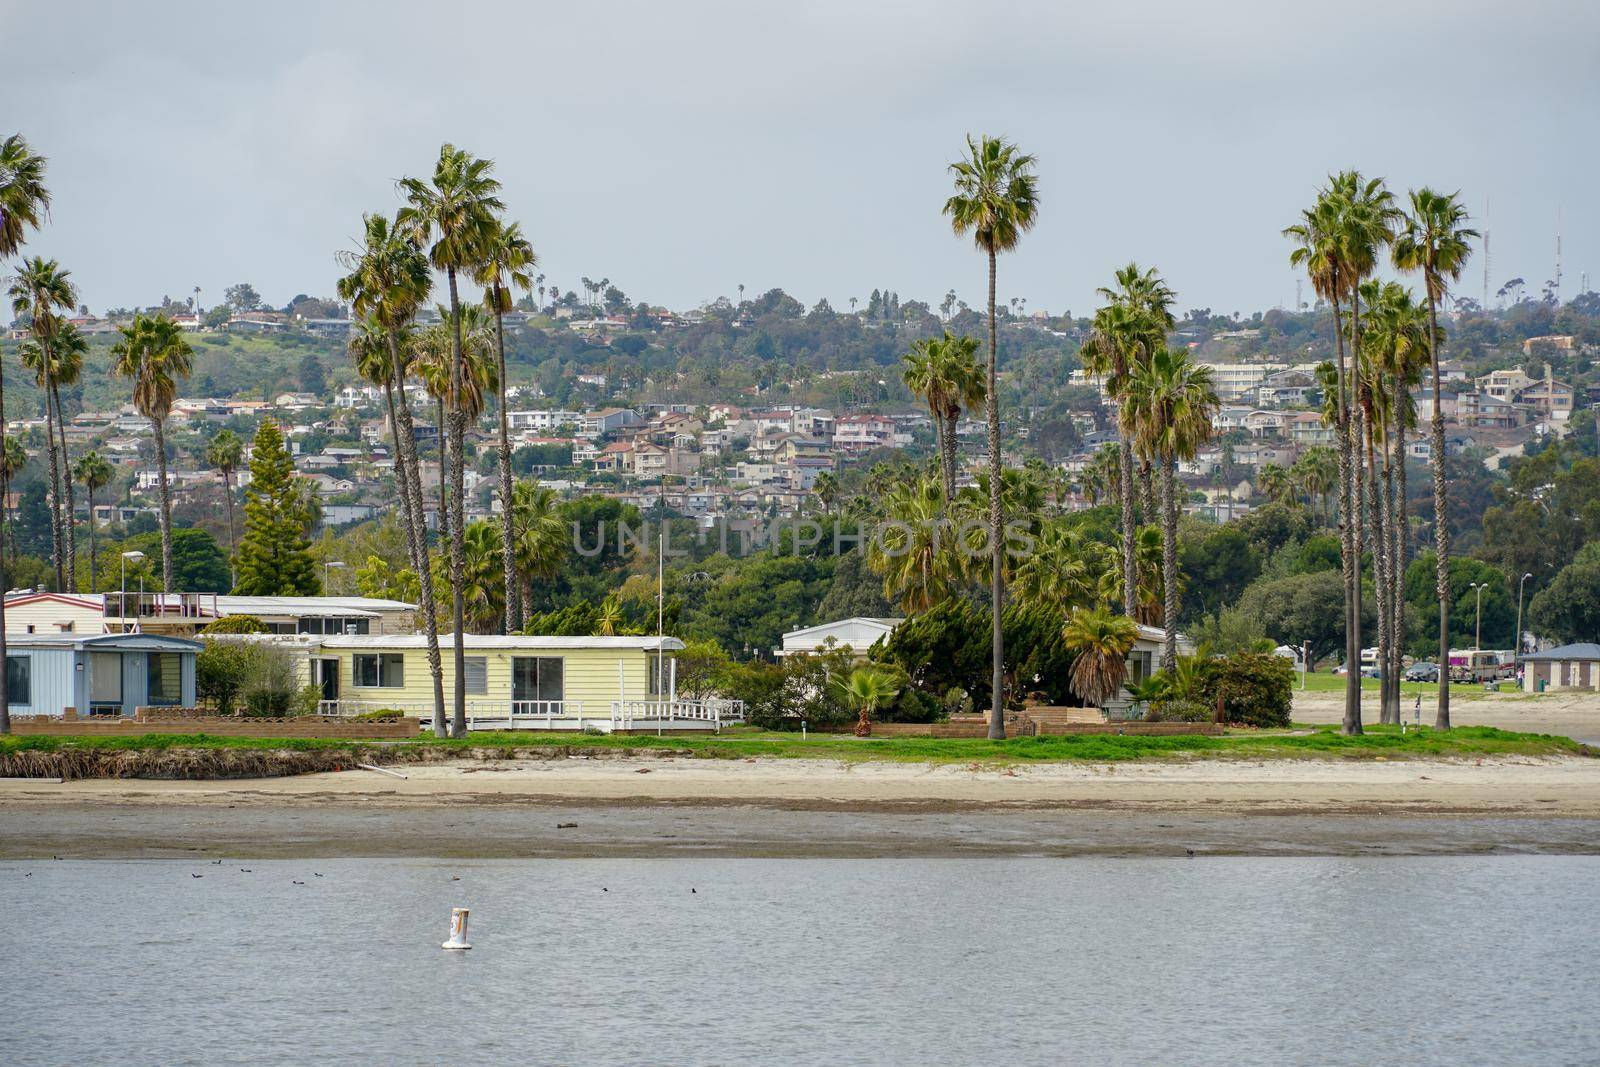 Caravan and home trailer park area next the water in the De Anza Cove in Mission Bay in San Diego by Bonandbon